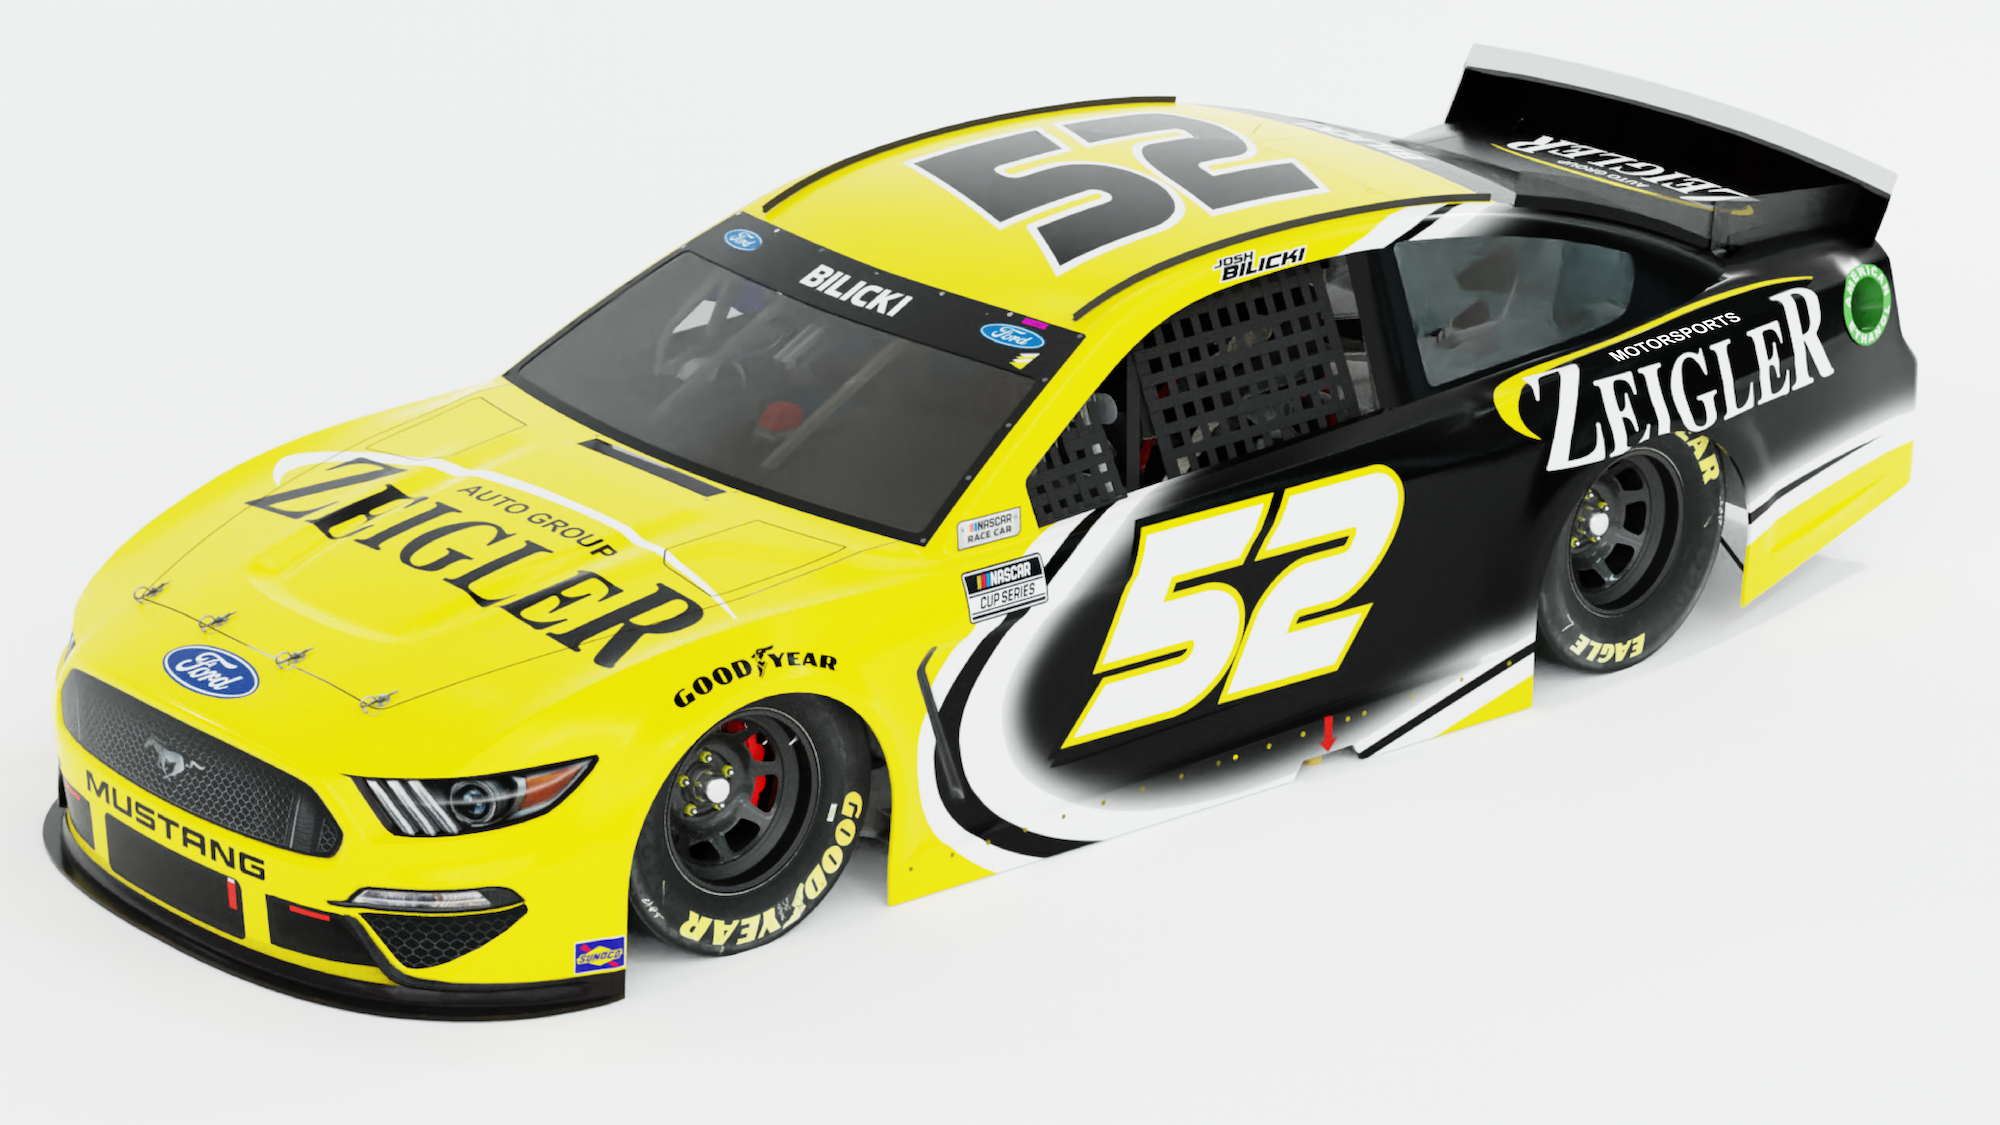 Zeigler Auto Group to sponsor Josh Bilicki at Michigan on Sunday, August 22 for the FireKeepers Casino 400 of the NASCAR Cup Series